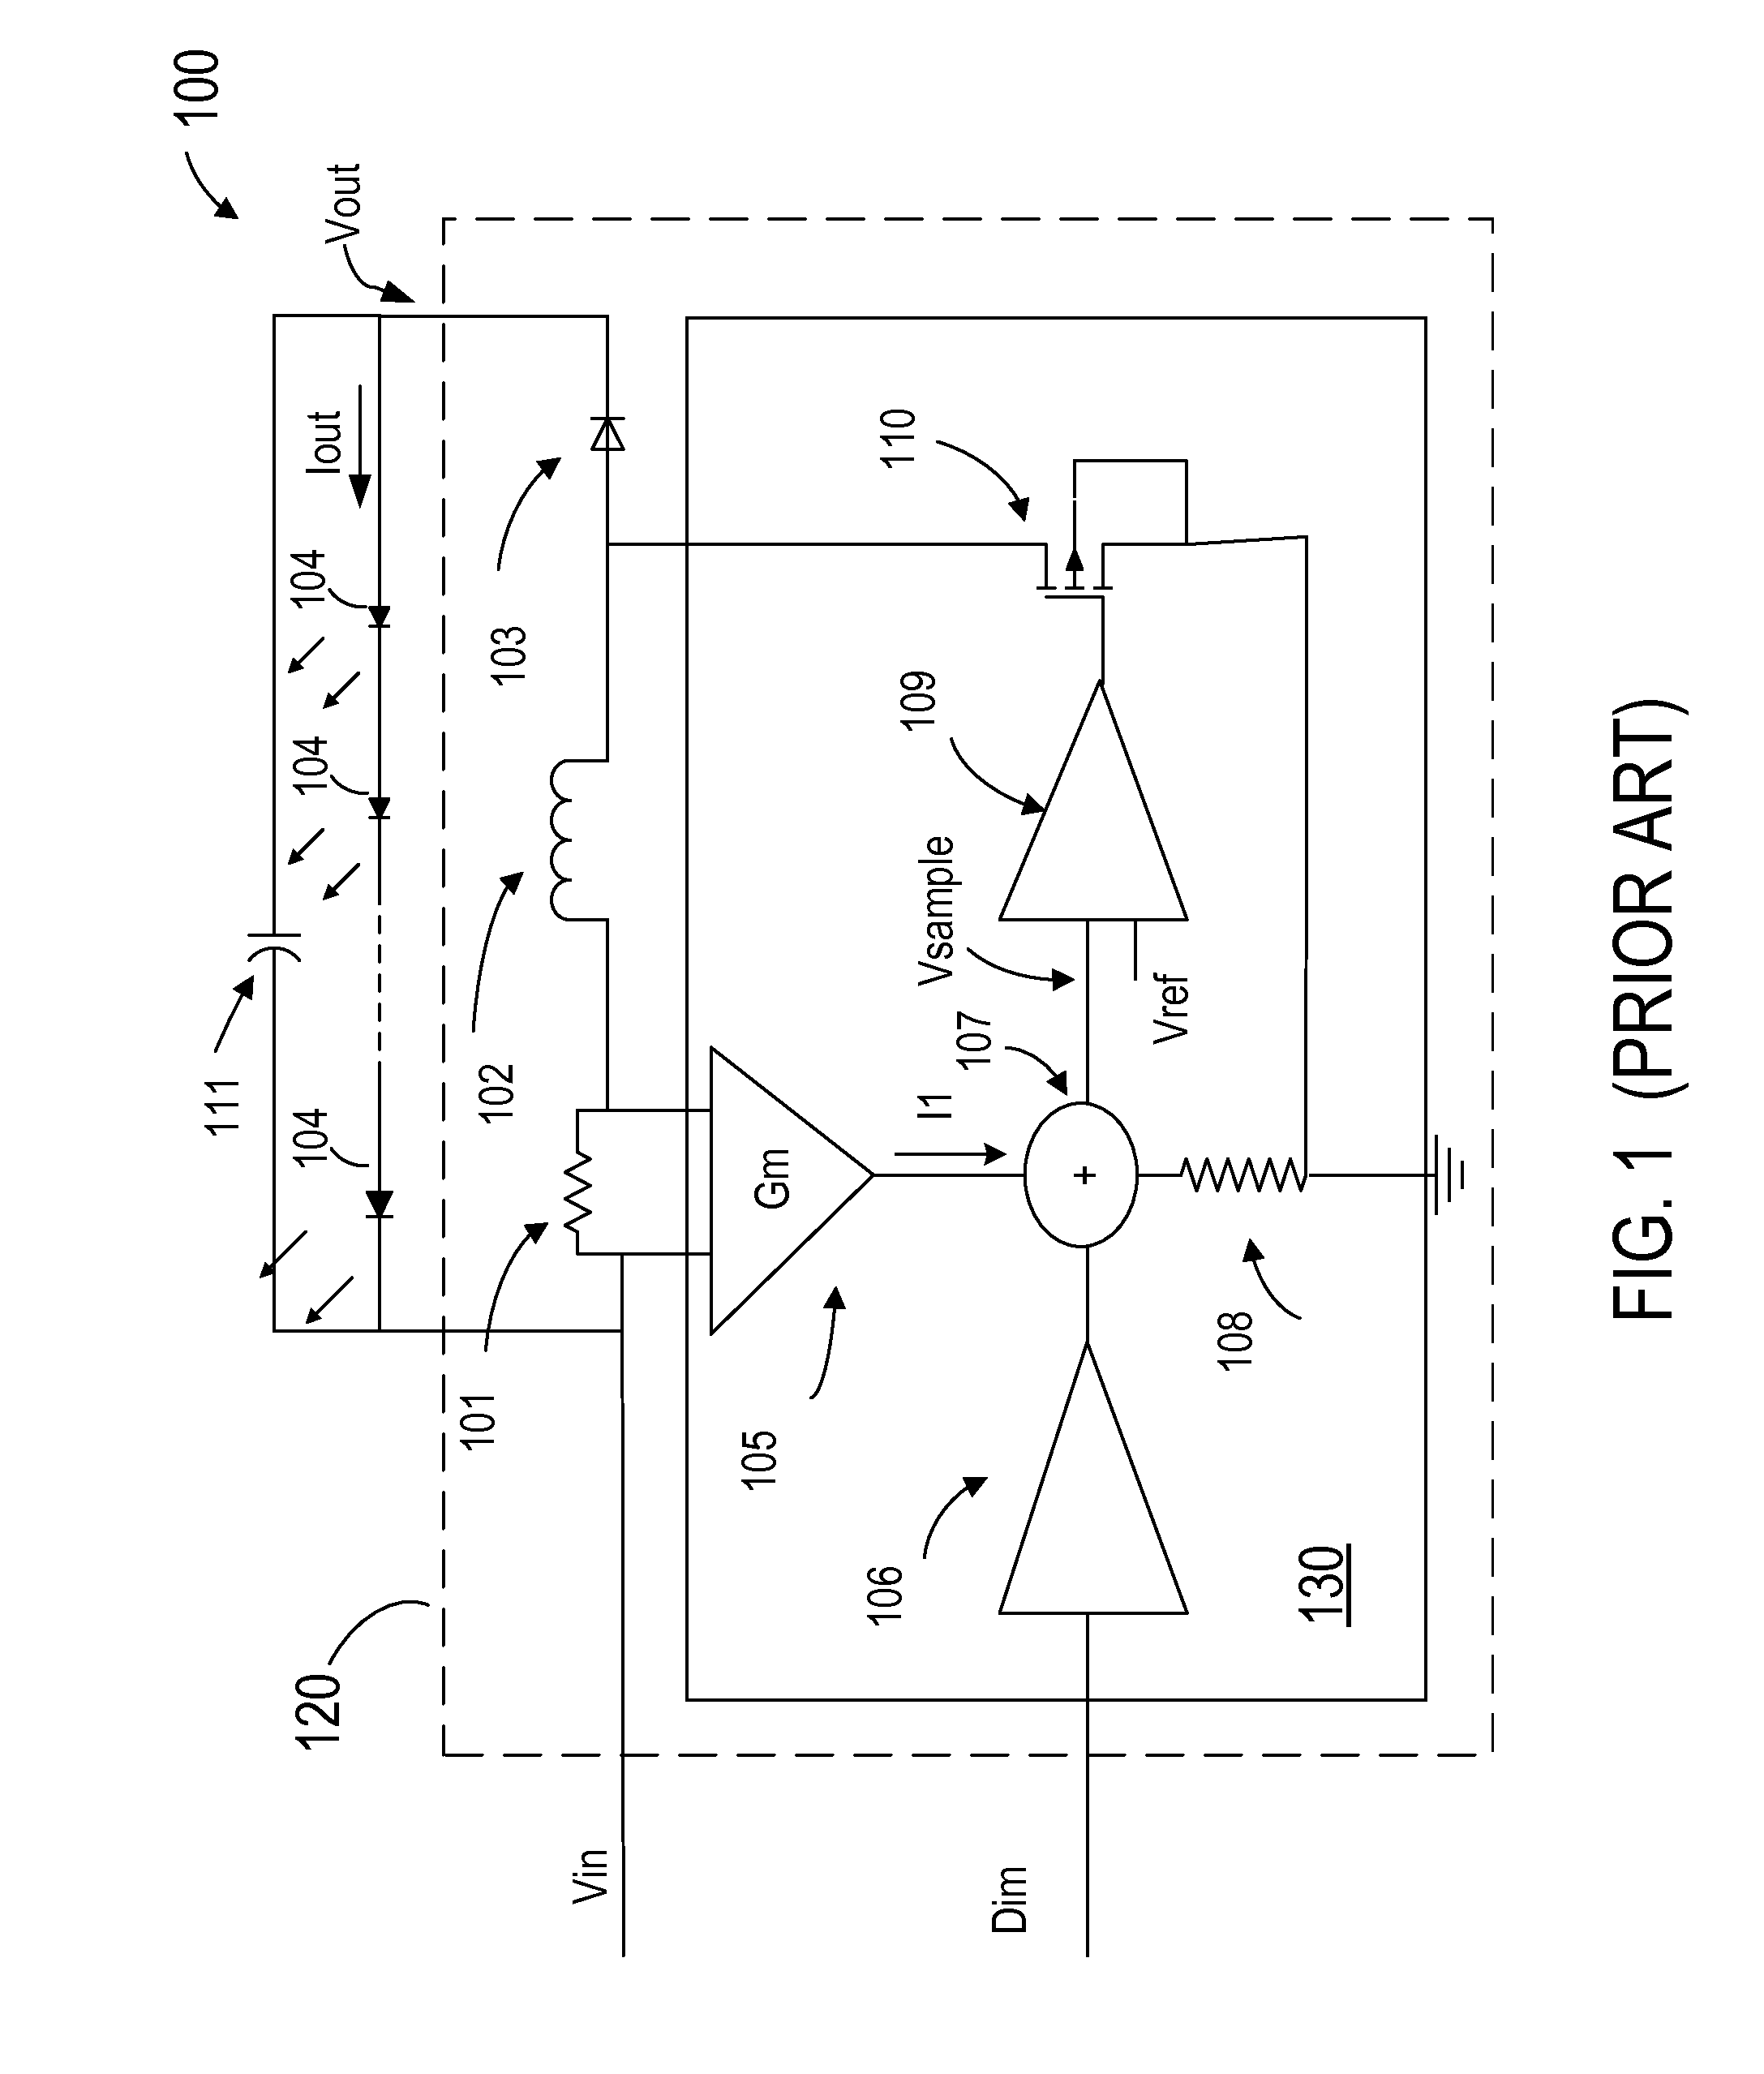 Methods and systems for LED driver having constant output current